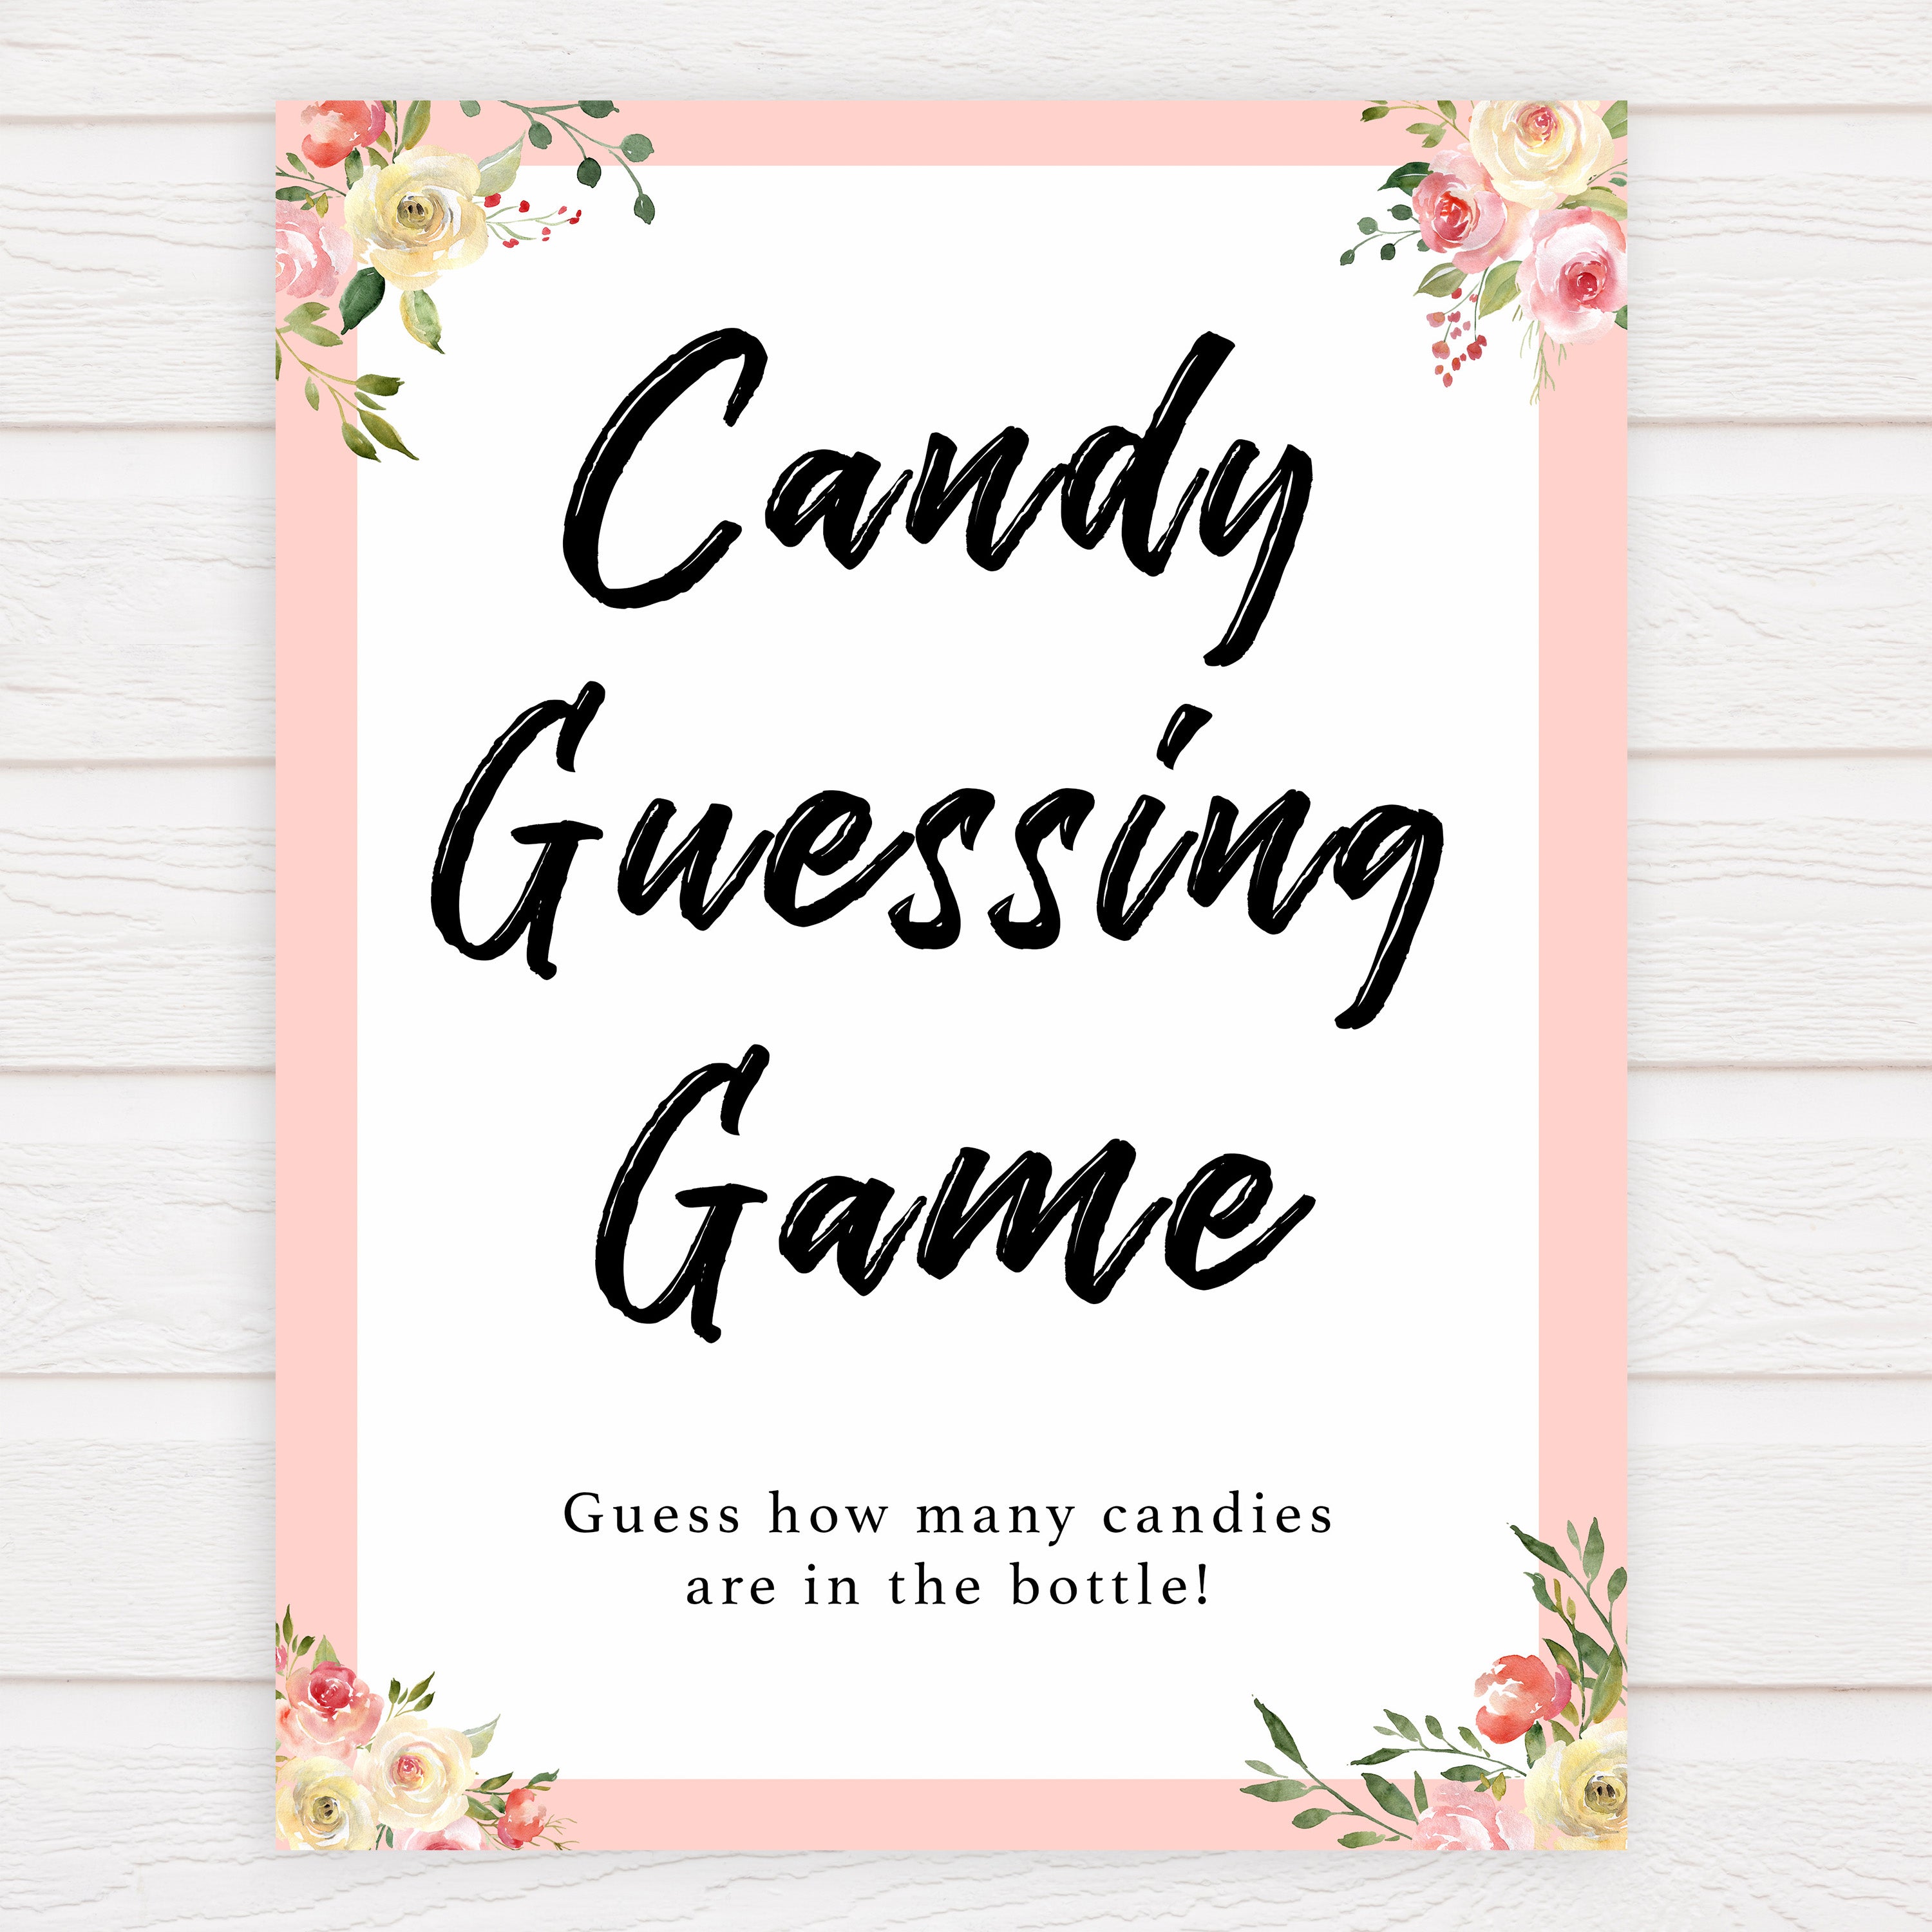 spring floral candy guessing game baby shower games, printable baby shower games, fun baby shower games, baby shower games, popular baby shower games